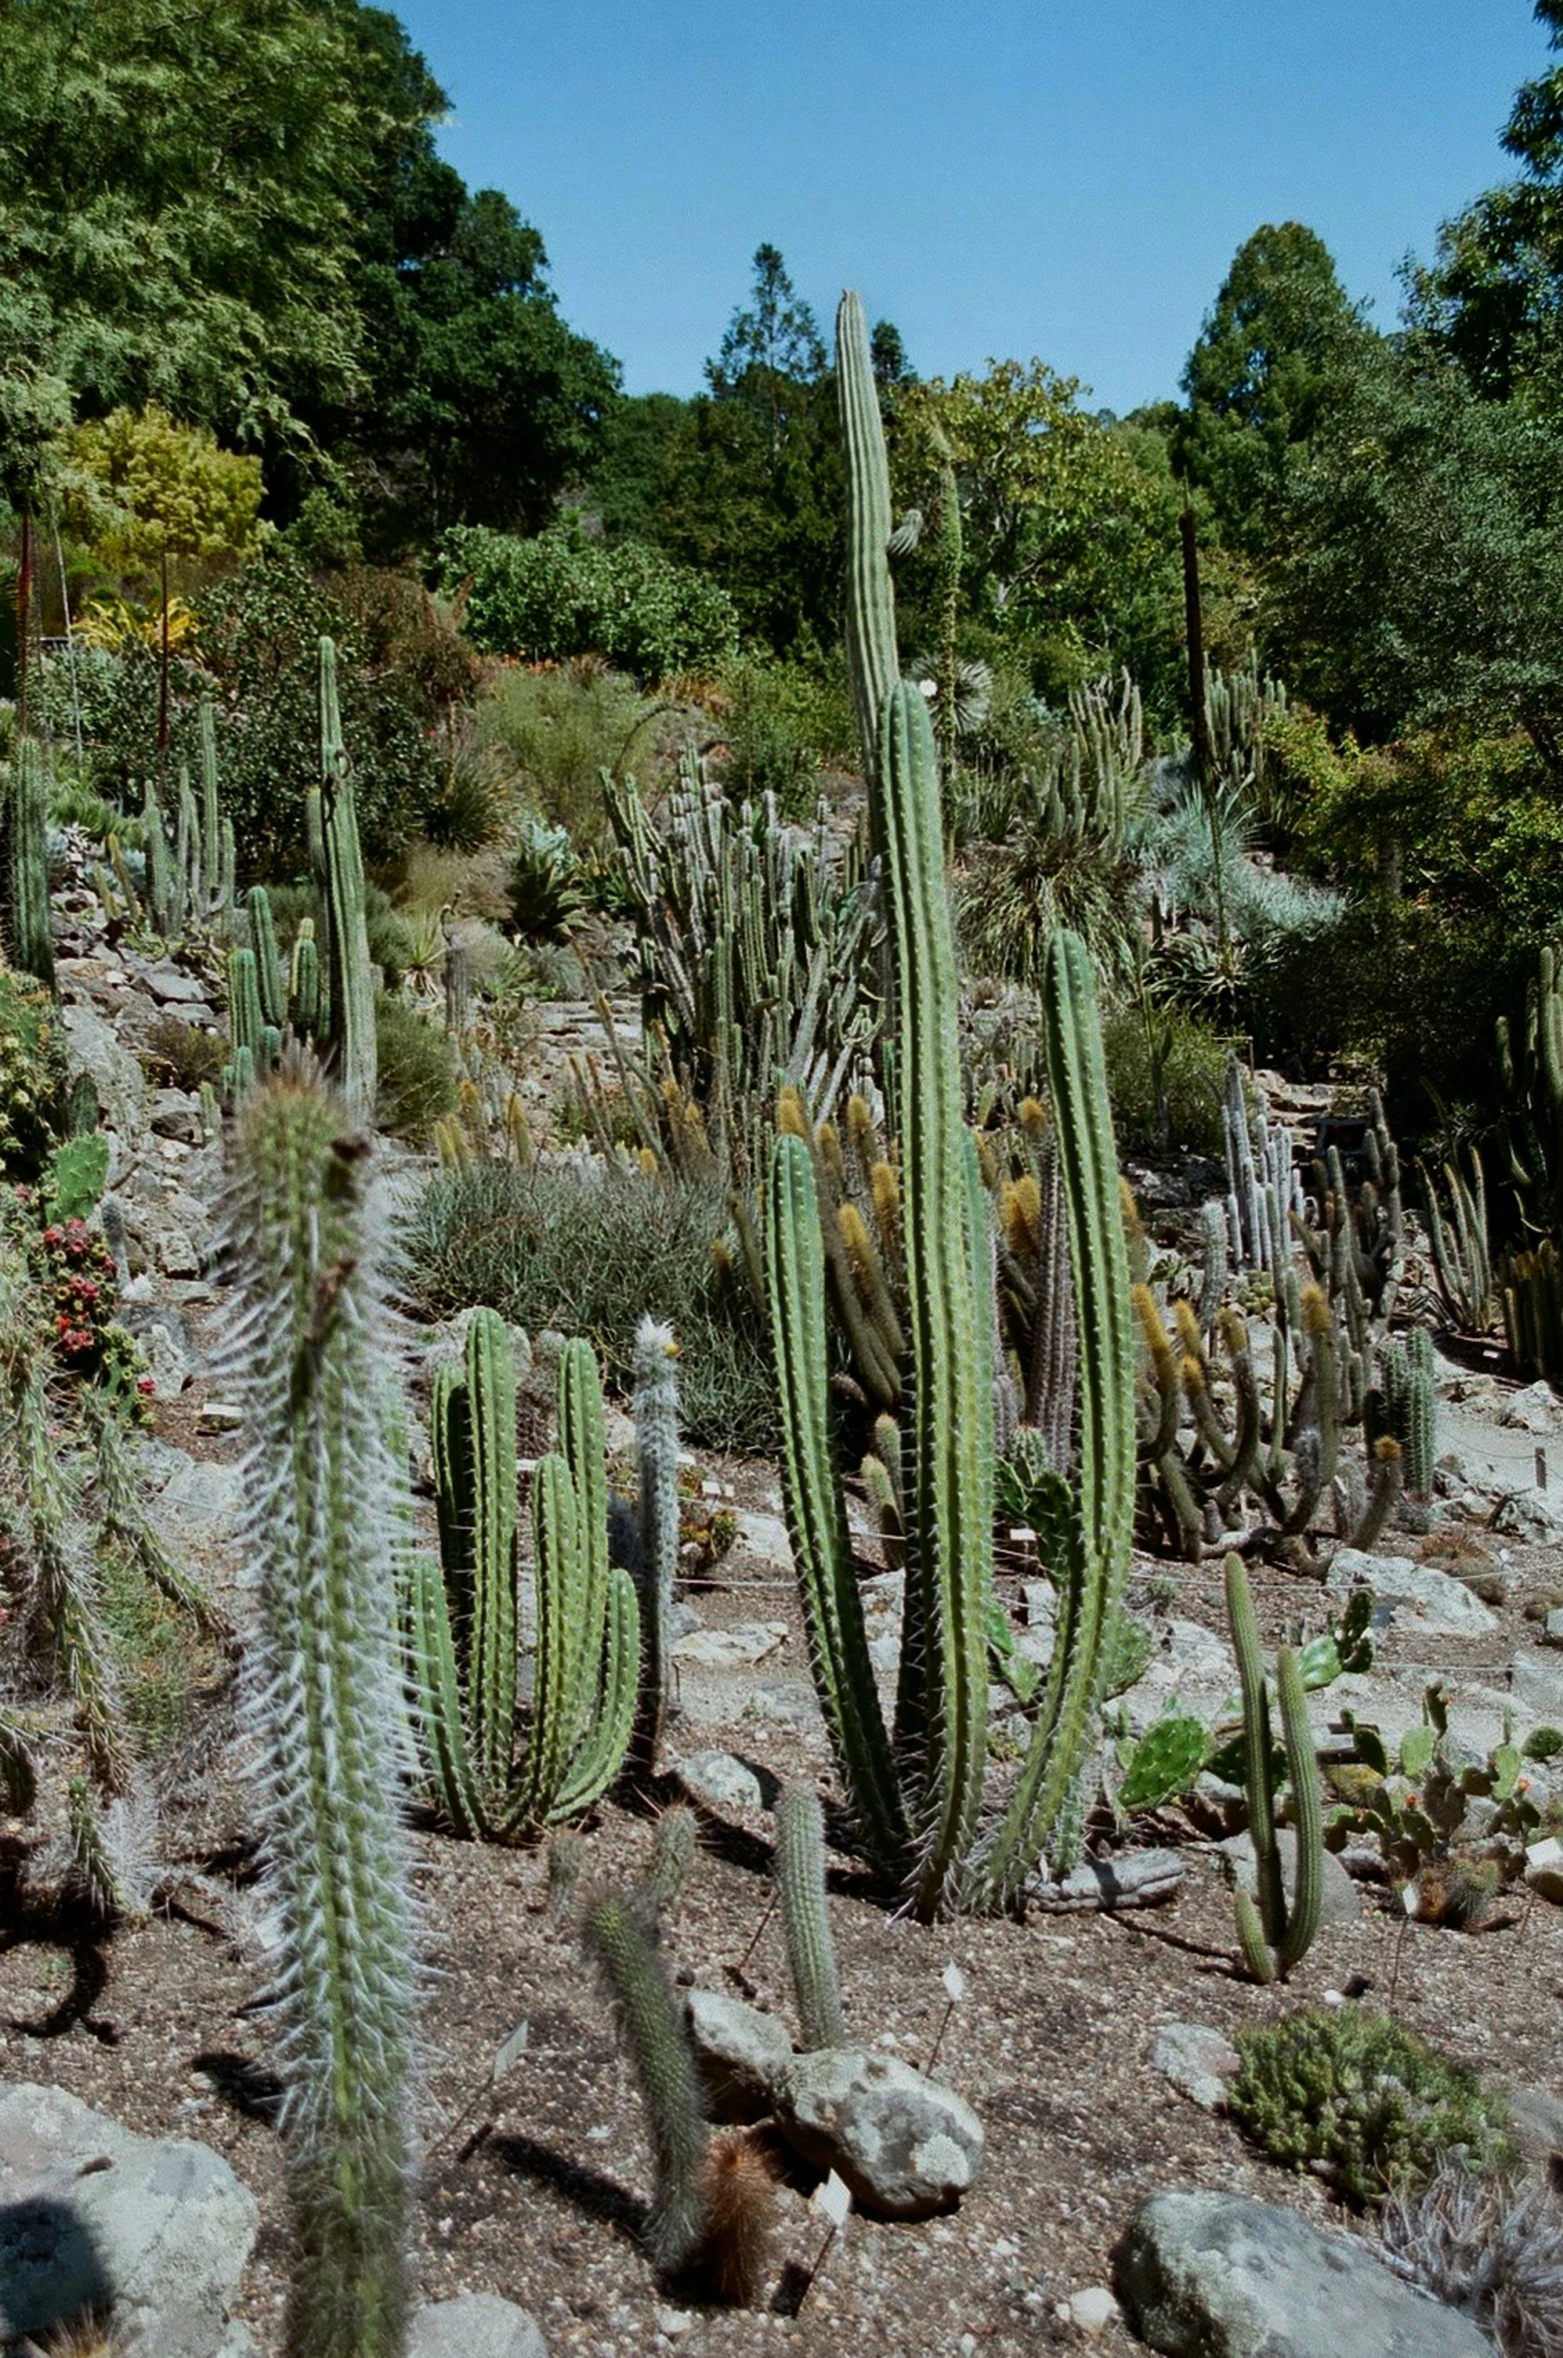 various cactus plants growing on the ground